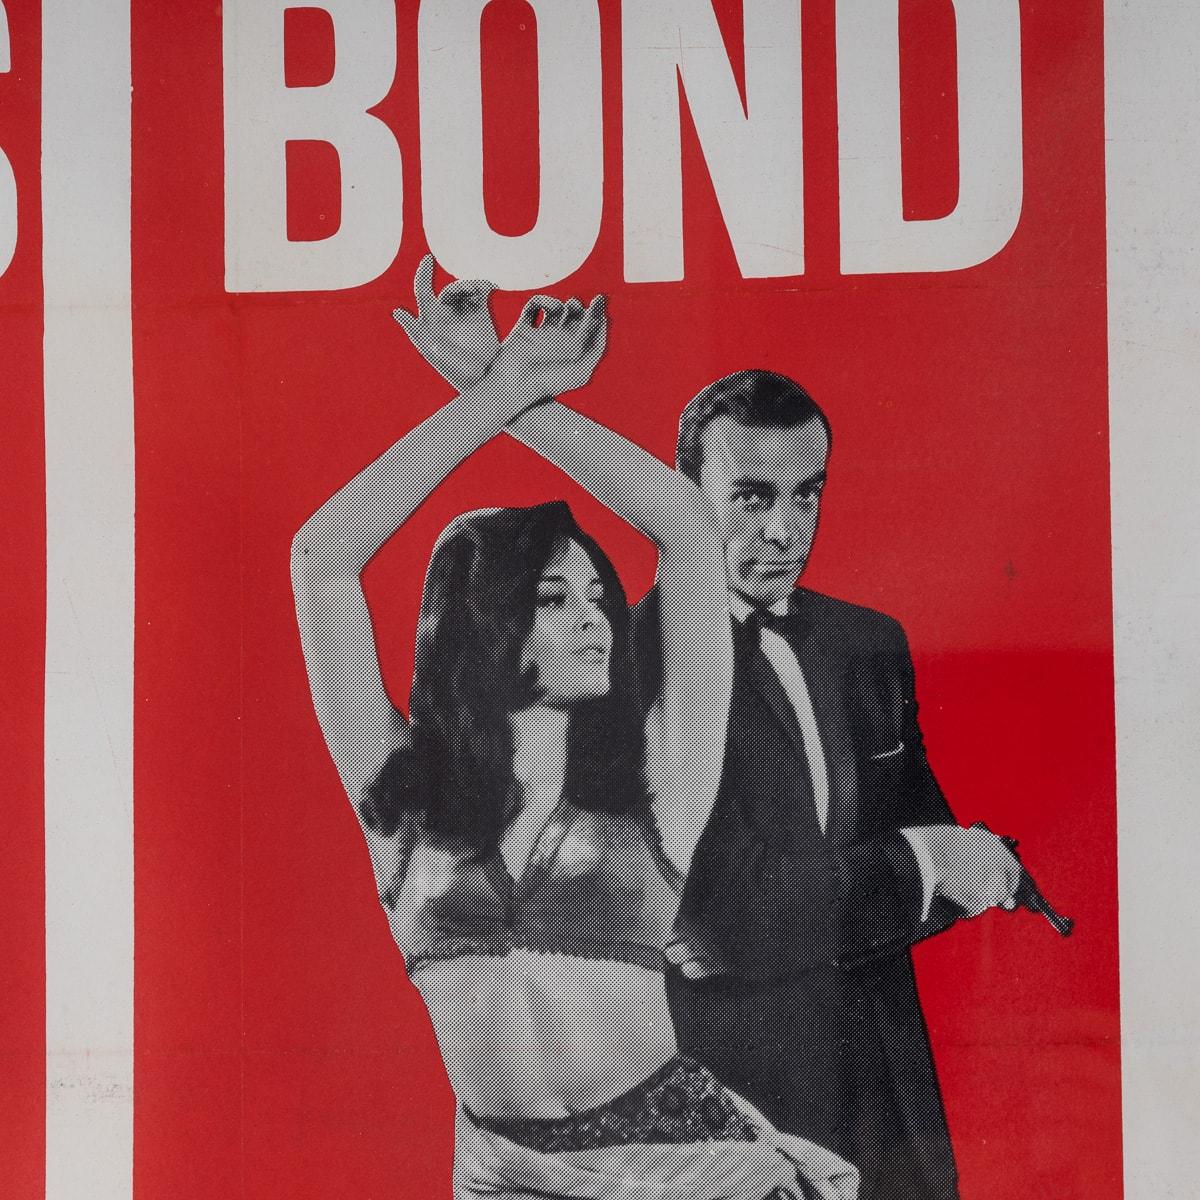 Acrylic Original American (U.S) Release James Bond 'From Russia With Love' Poster c.1963 For Sale